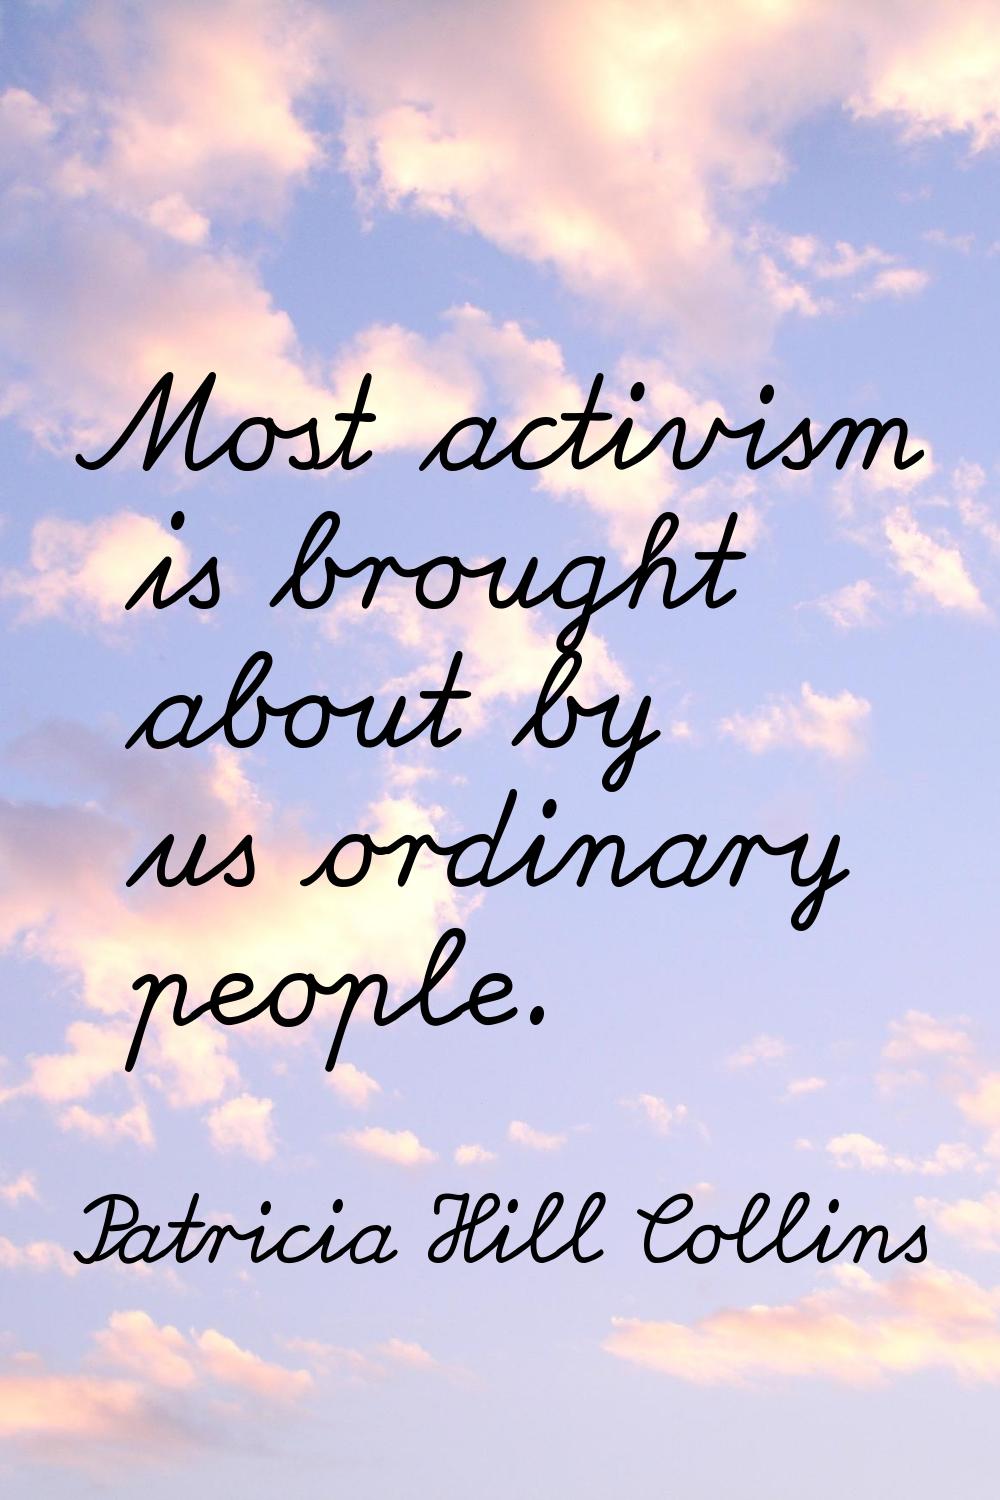 Most activism is brought about by us ordinary people.